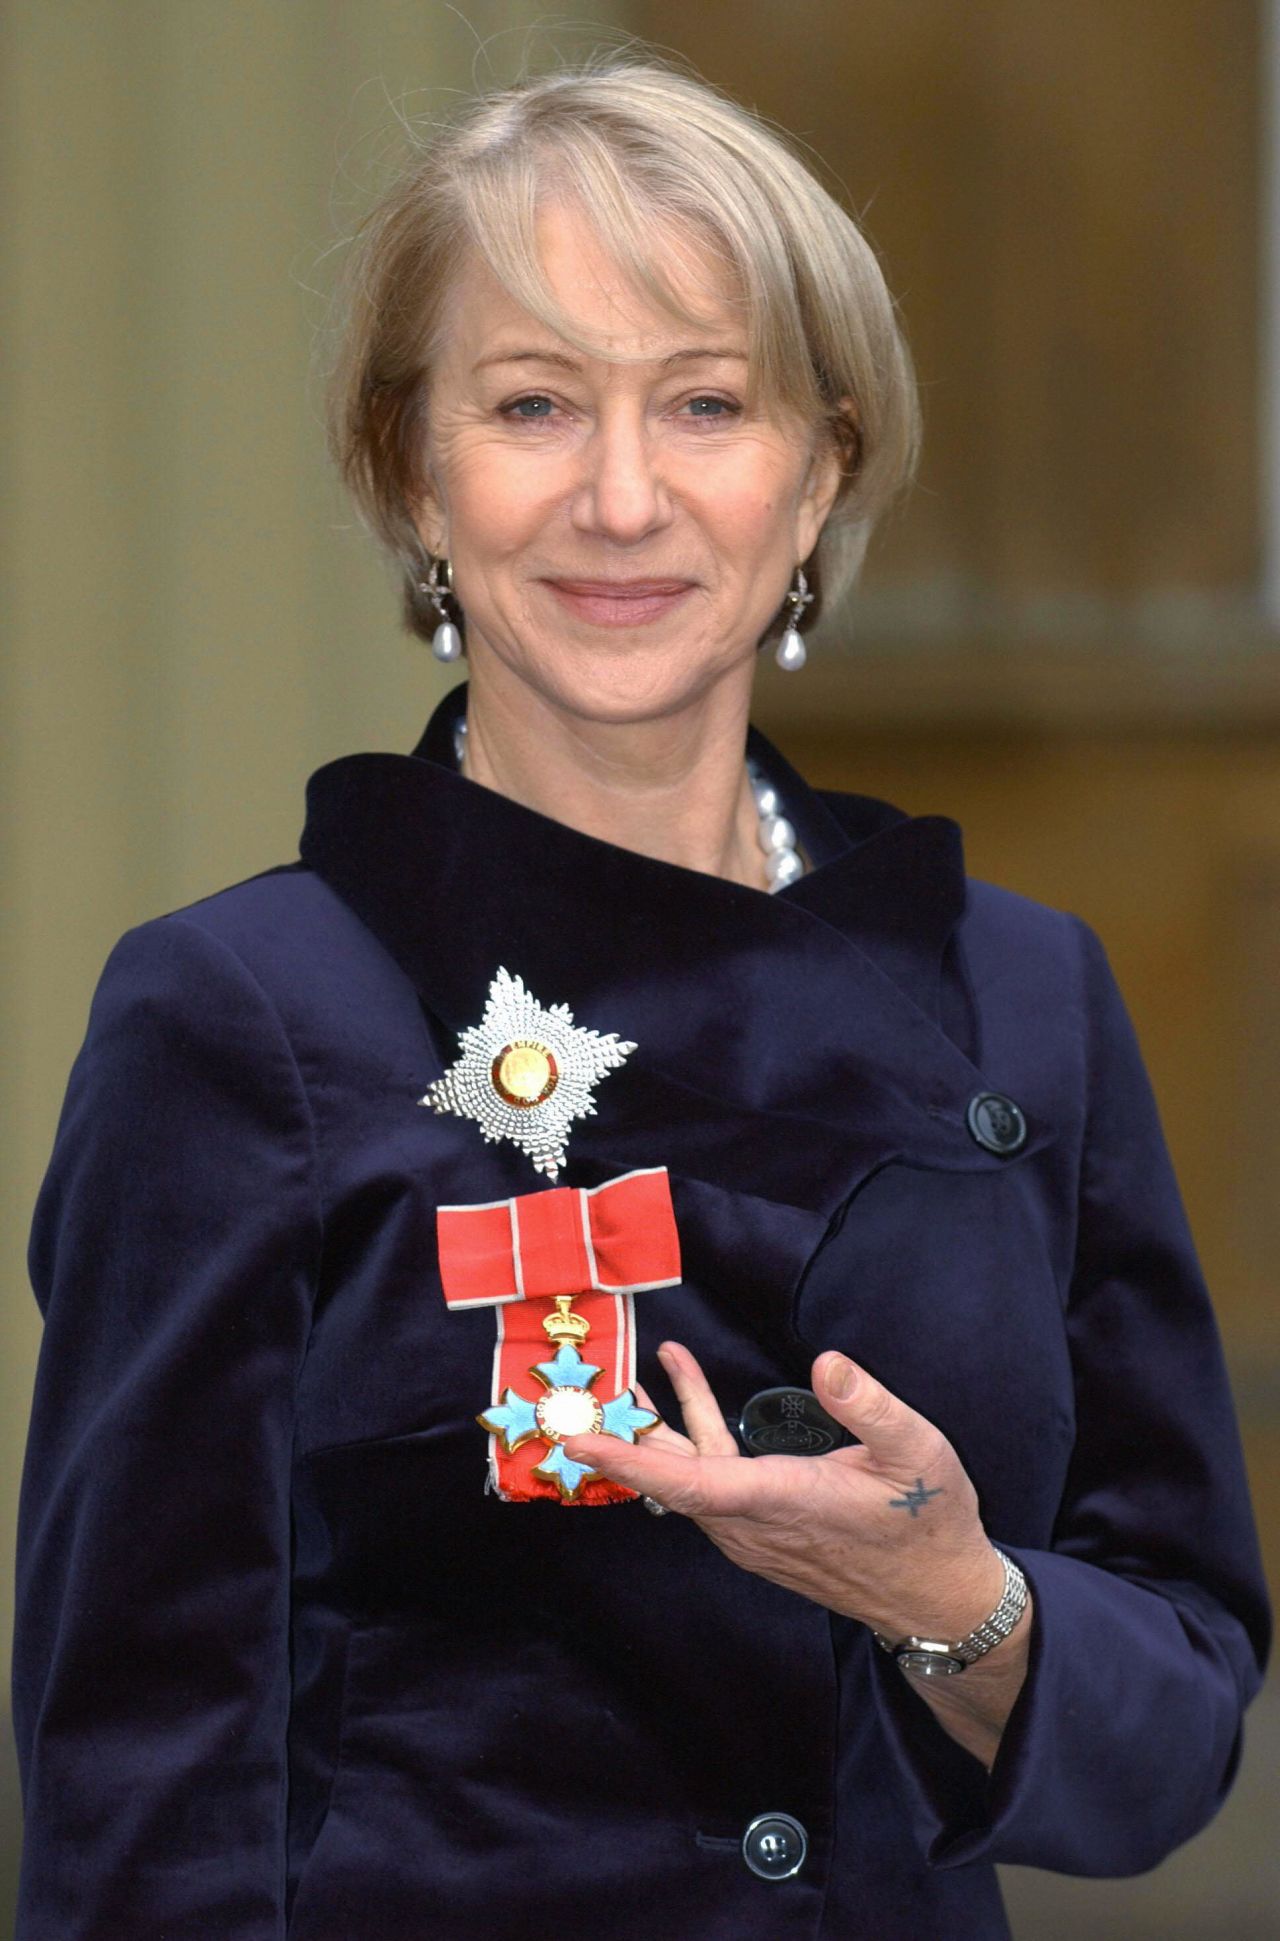 On December 5, 2003, Mirren was invested as a Dame from the Prince of Wales during a ceremony at Buckingham Palace.